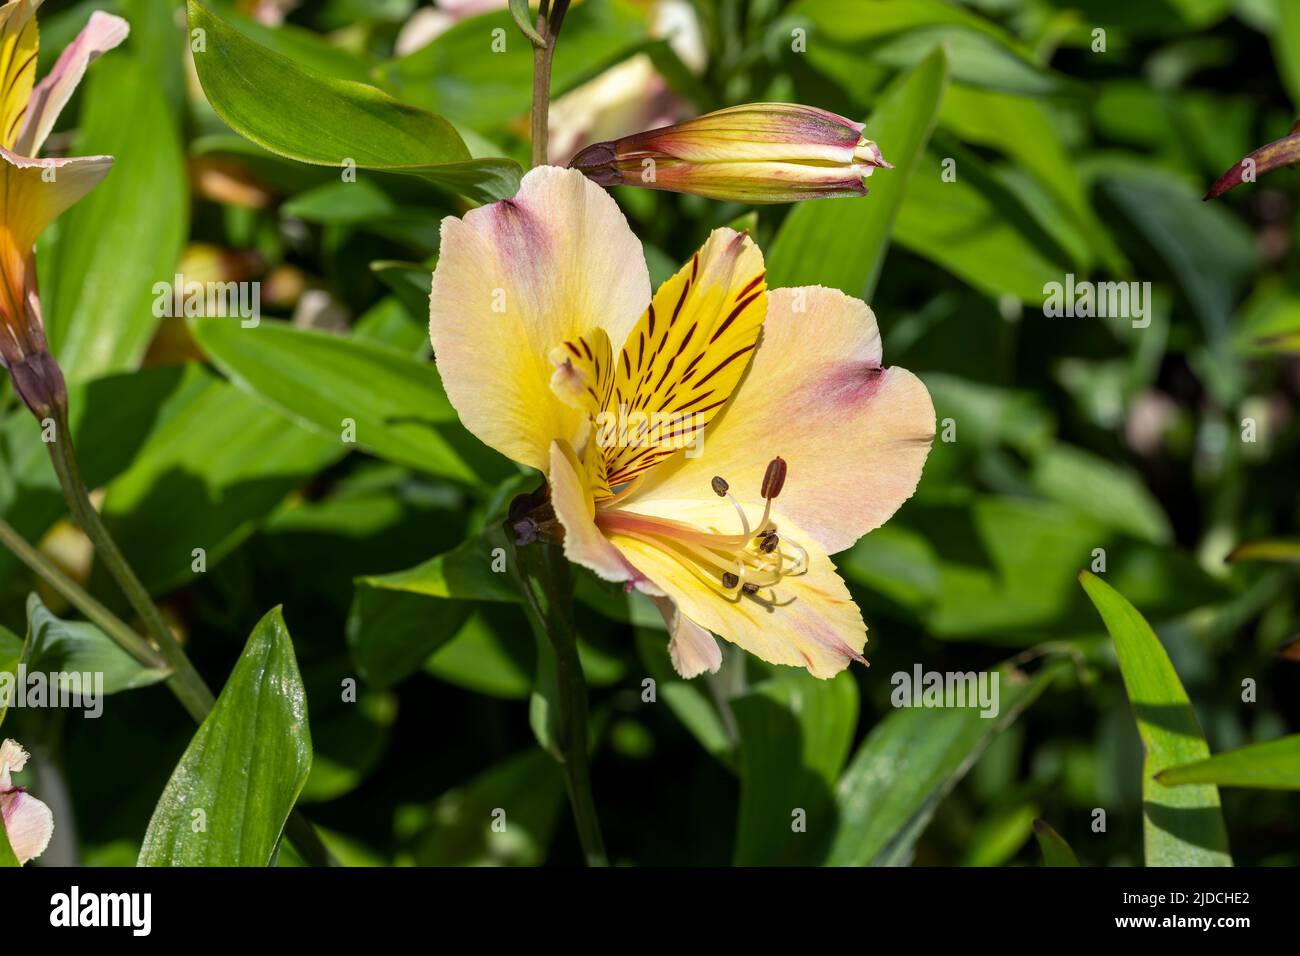 Alstroemeria 'Friendship' a summer flowering plant with a yellow pink summertime flower and commonly known as Peruvian lily, stock photo image Stock Photo